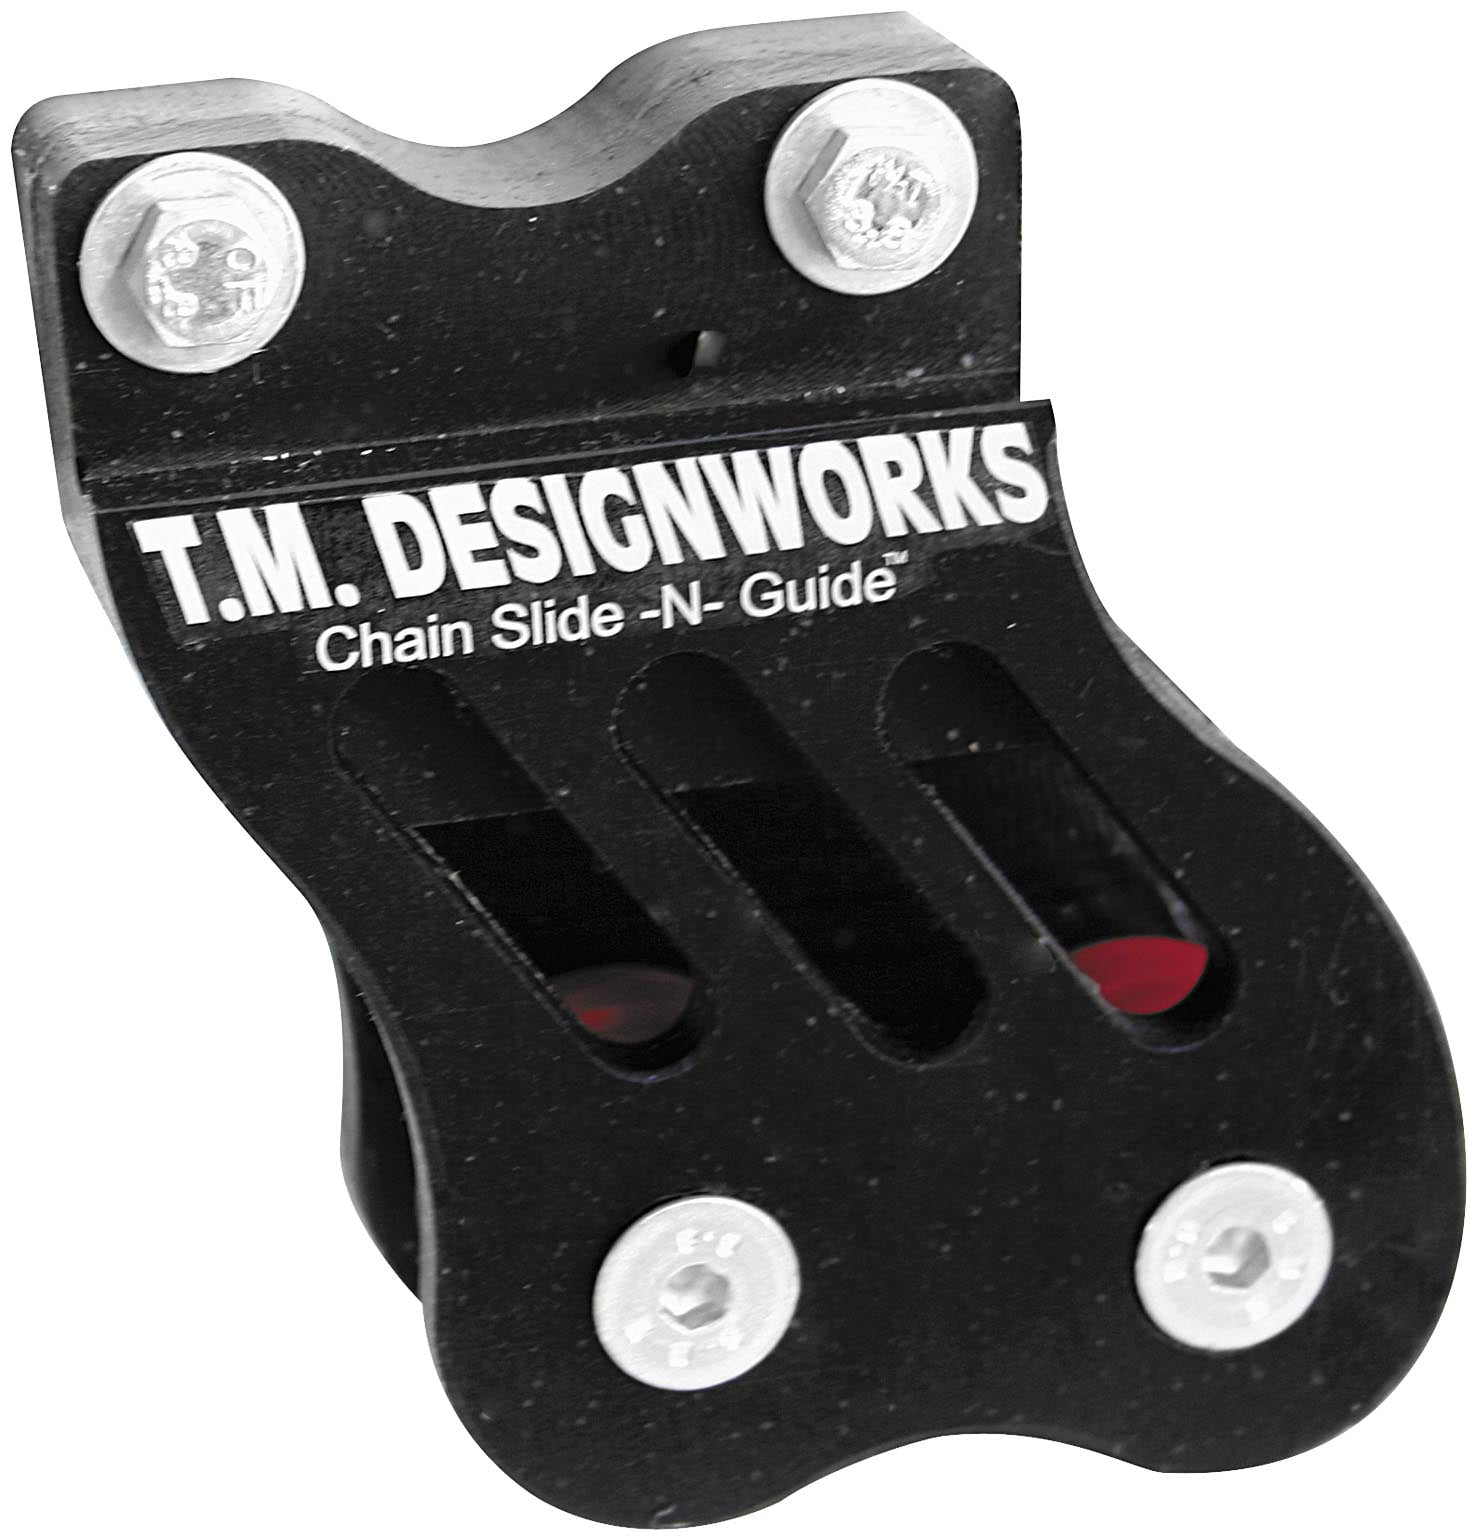 Designworks Rear Chain Guide And Solid Powerlip Wear Pad RCG-007-BK T.M